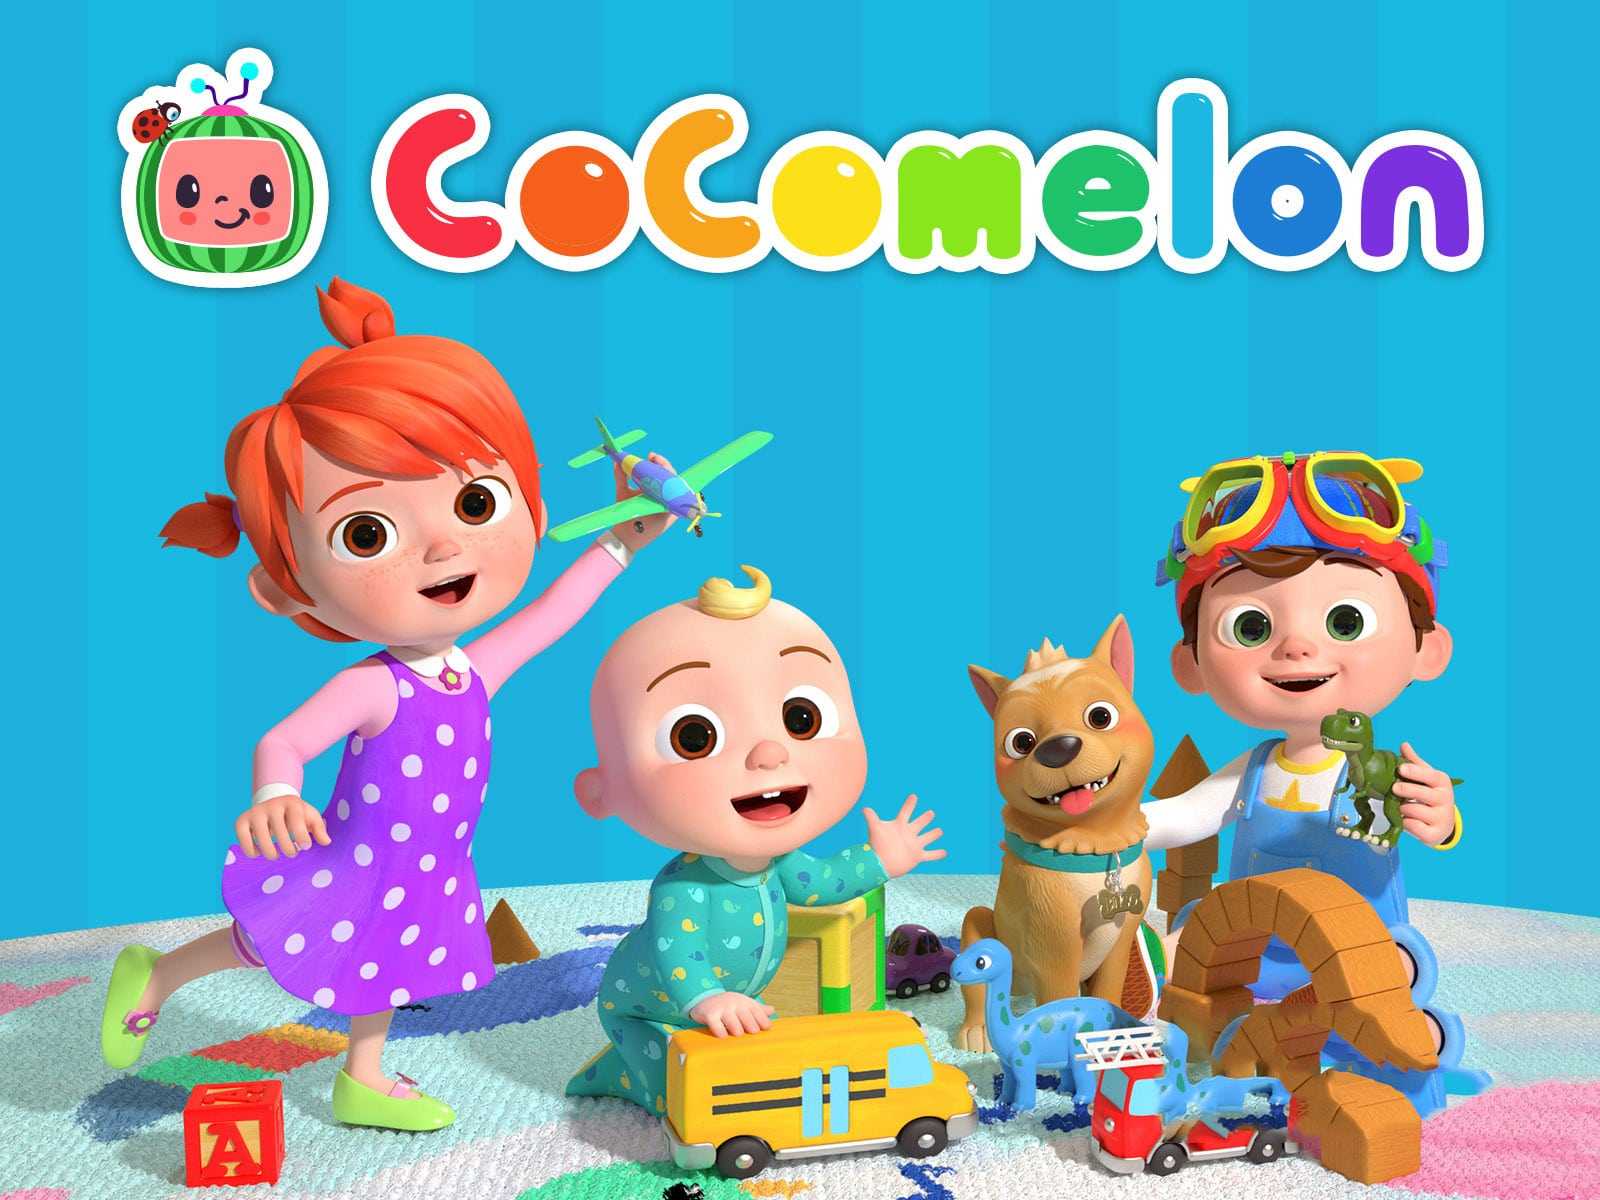 Cocomelon Wallpapers.